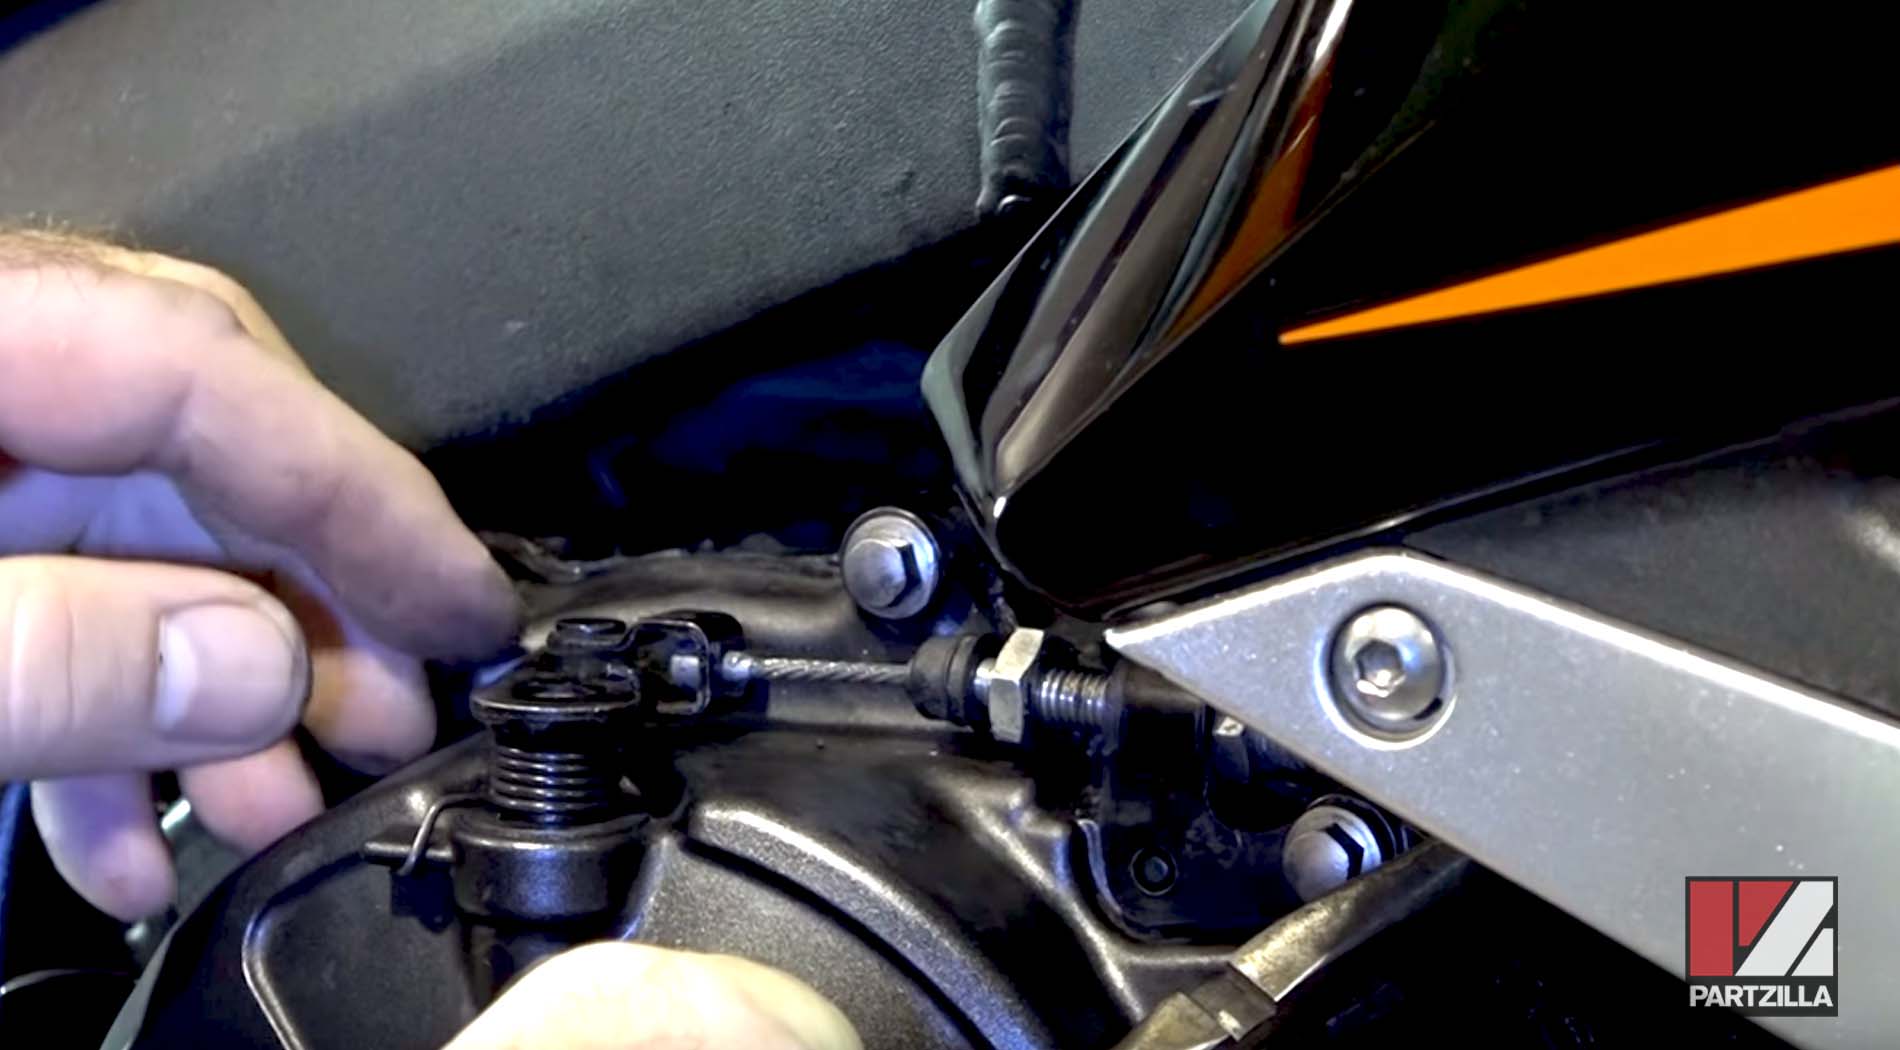 DIY motorcycle maintenance clutch cable adjustment